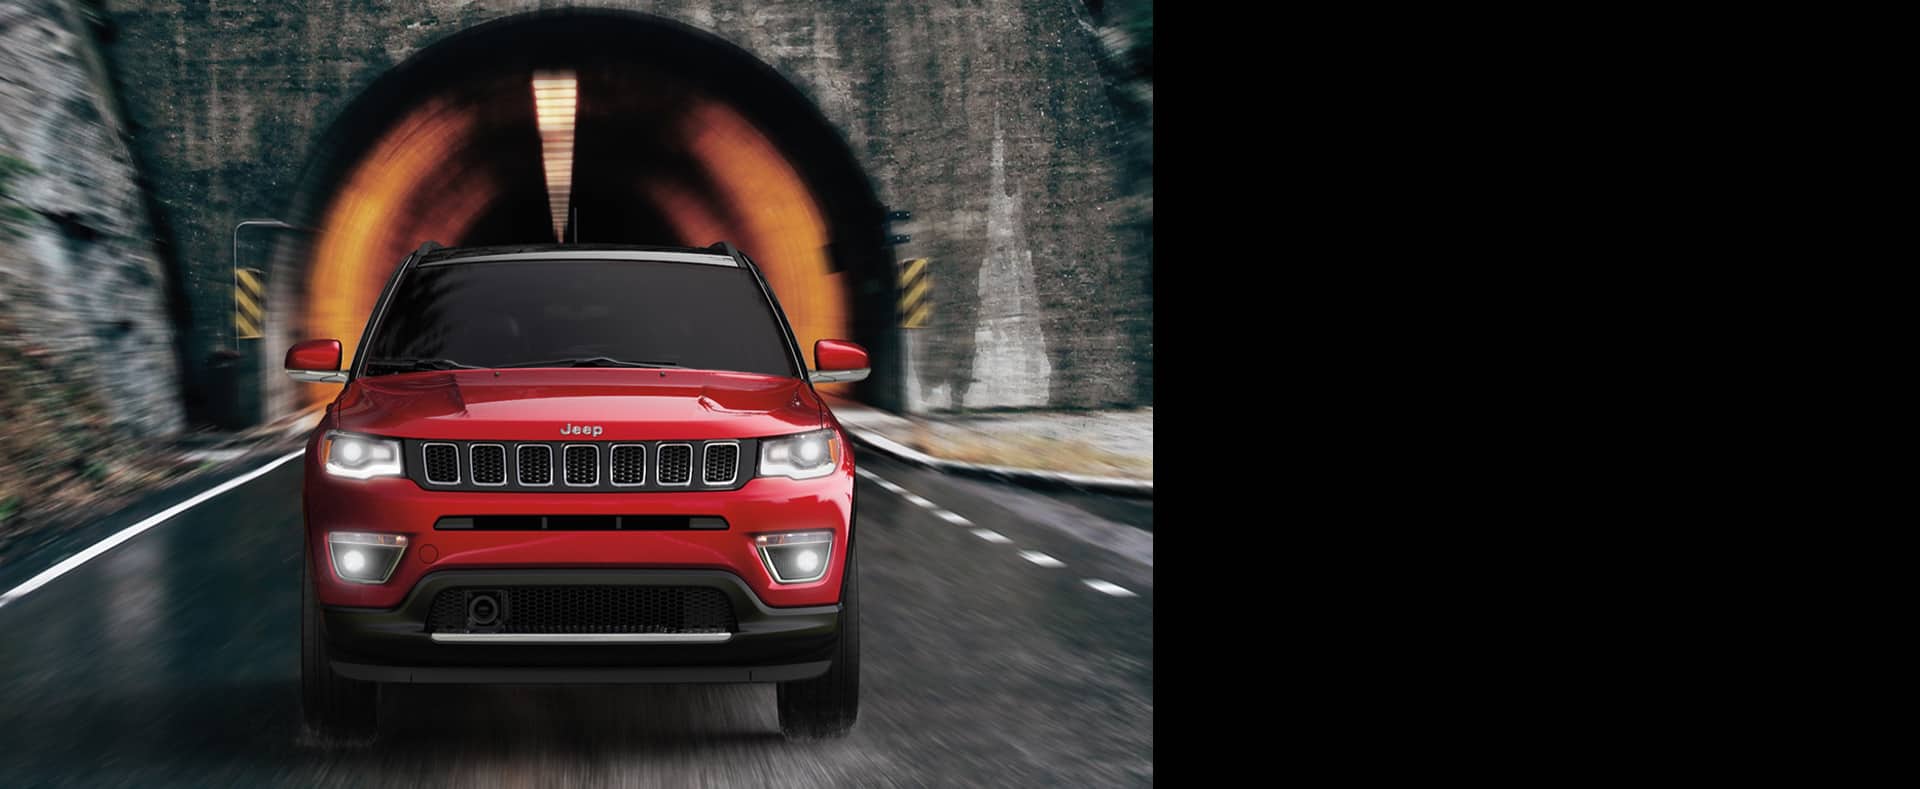 2021 Jeep Compass emerging from a tunnel.